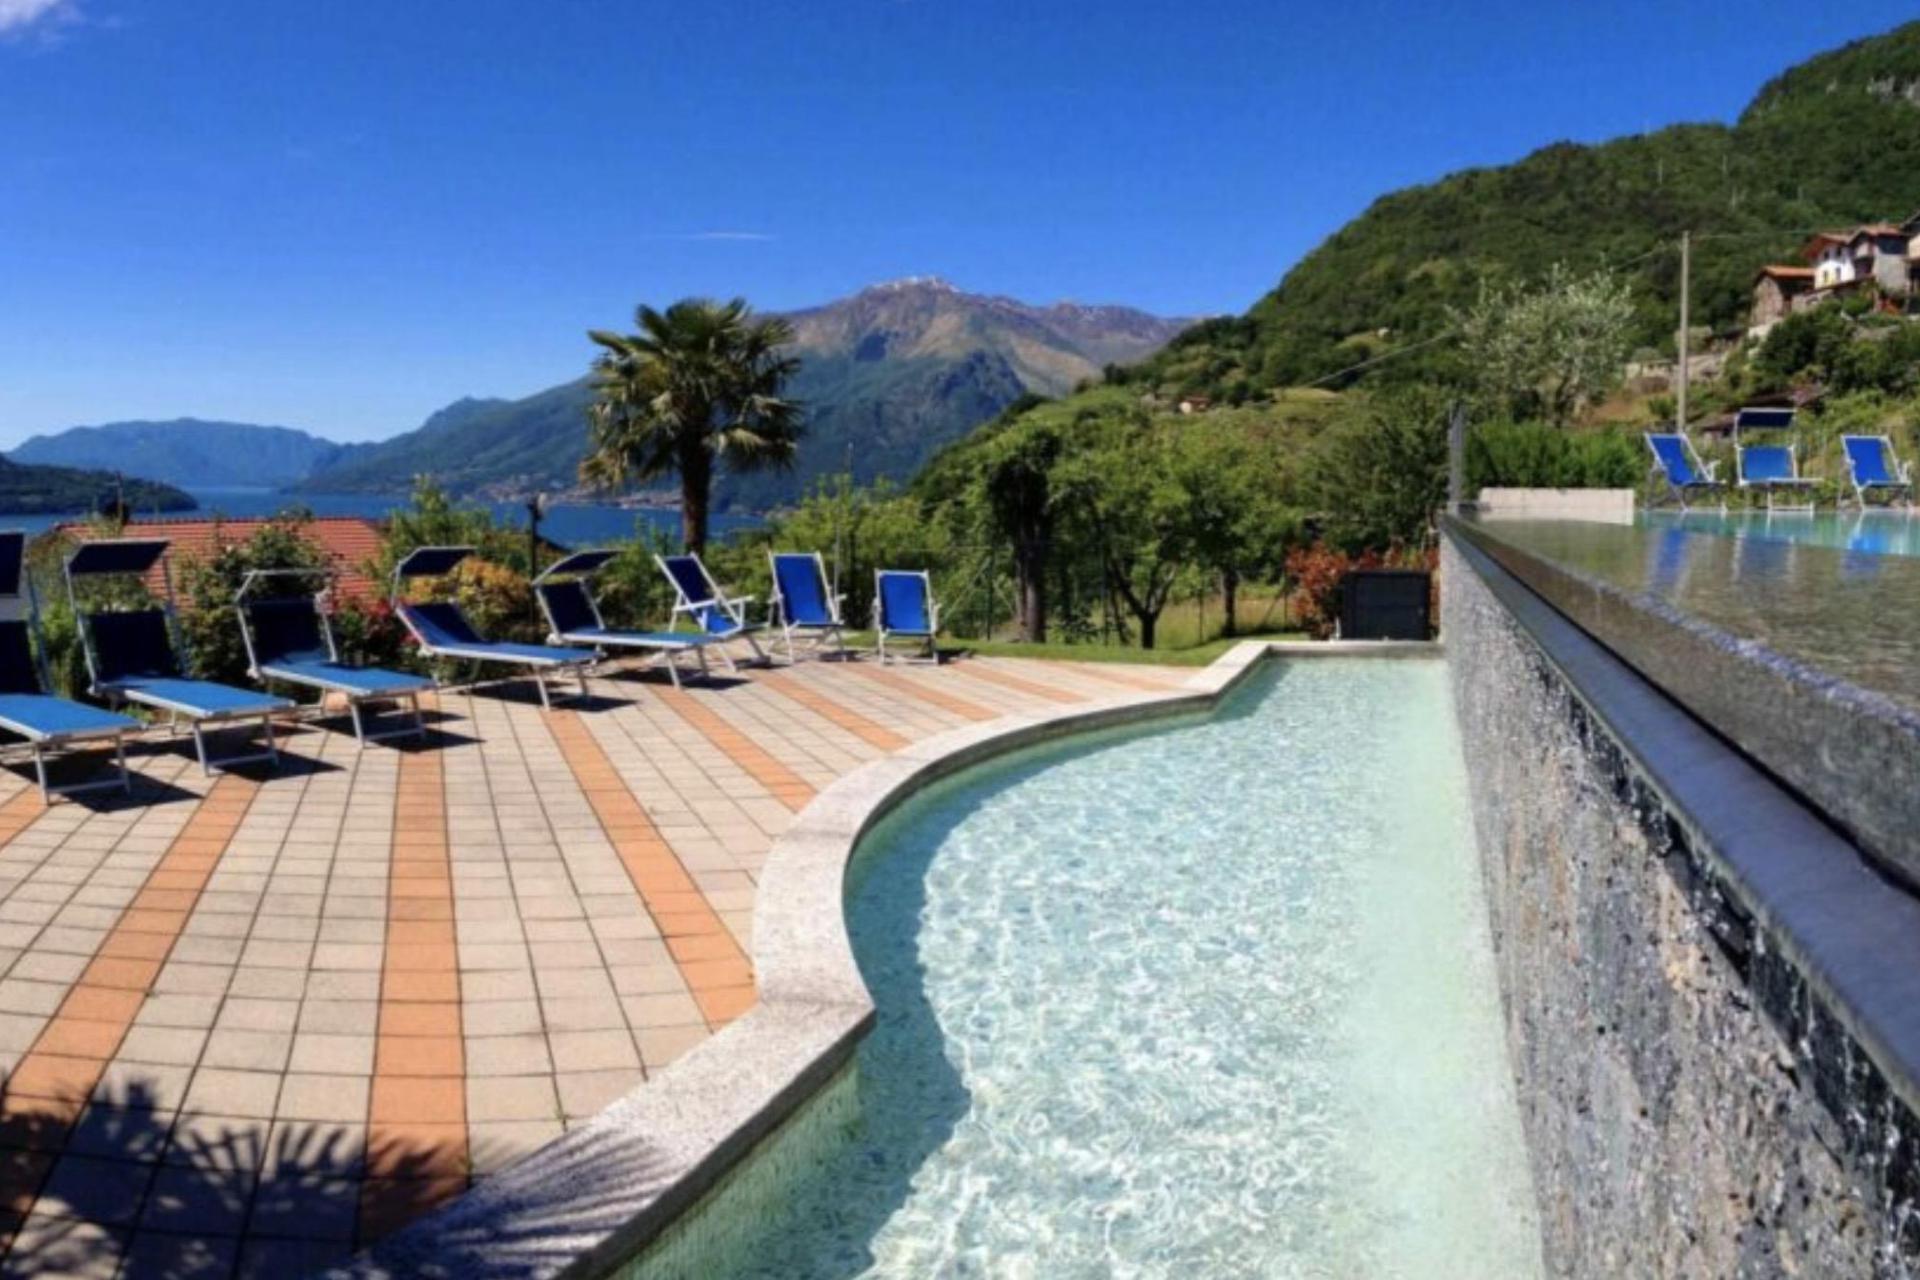 Residence per famiglie con infinity pool riscaldata